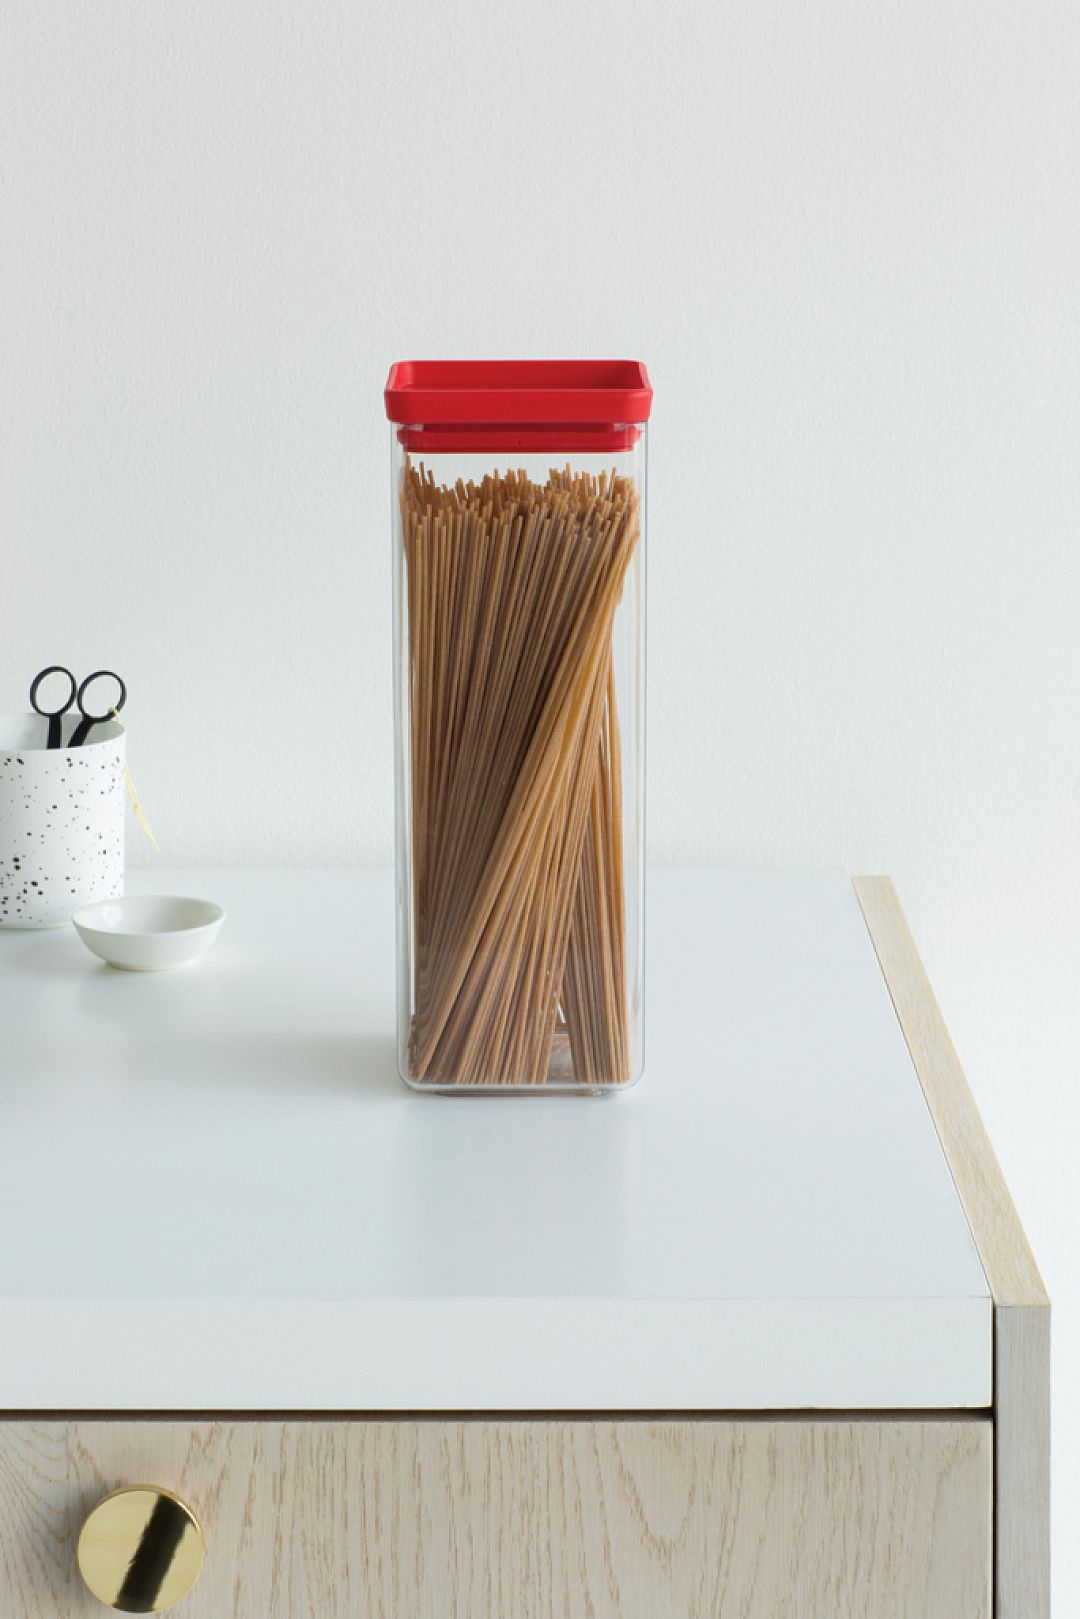 Square Canister, 2.5L Tasty Colours Red 8710755290046 Brabantia 683x1024px E NR 9155